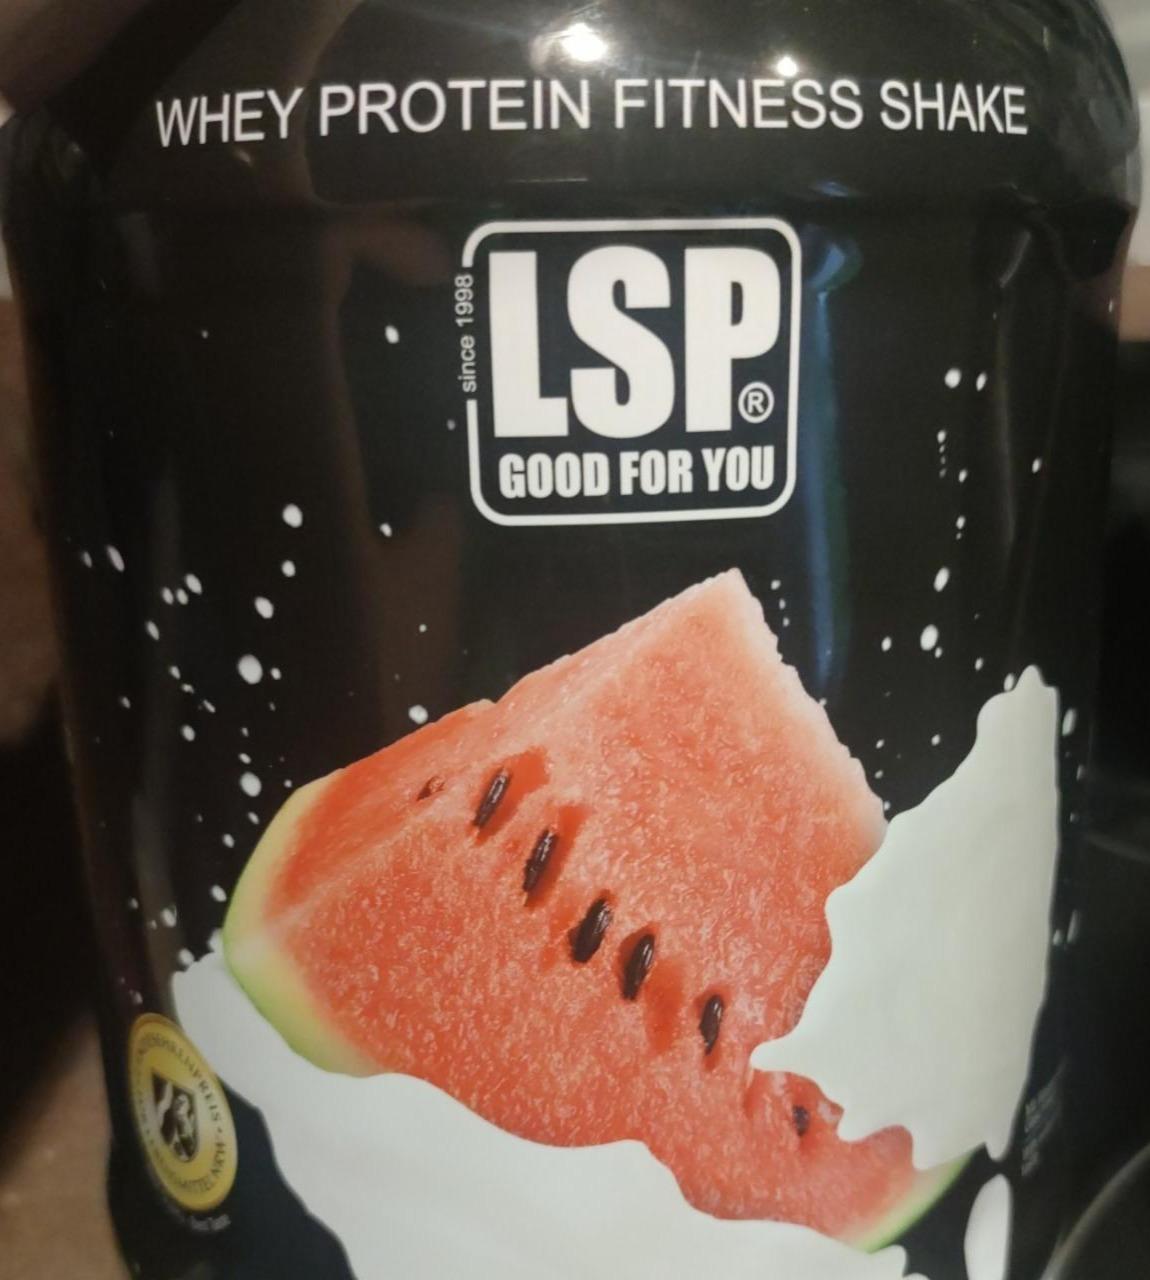 Fotografie - Whey protein fitness shake LSP good for you